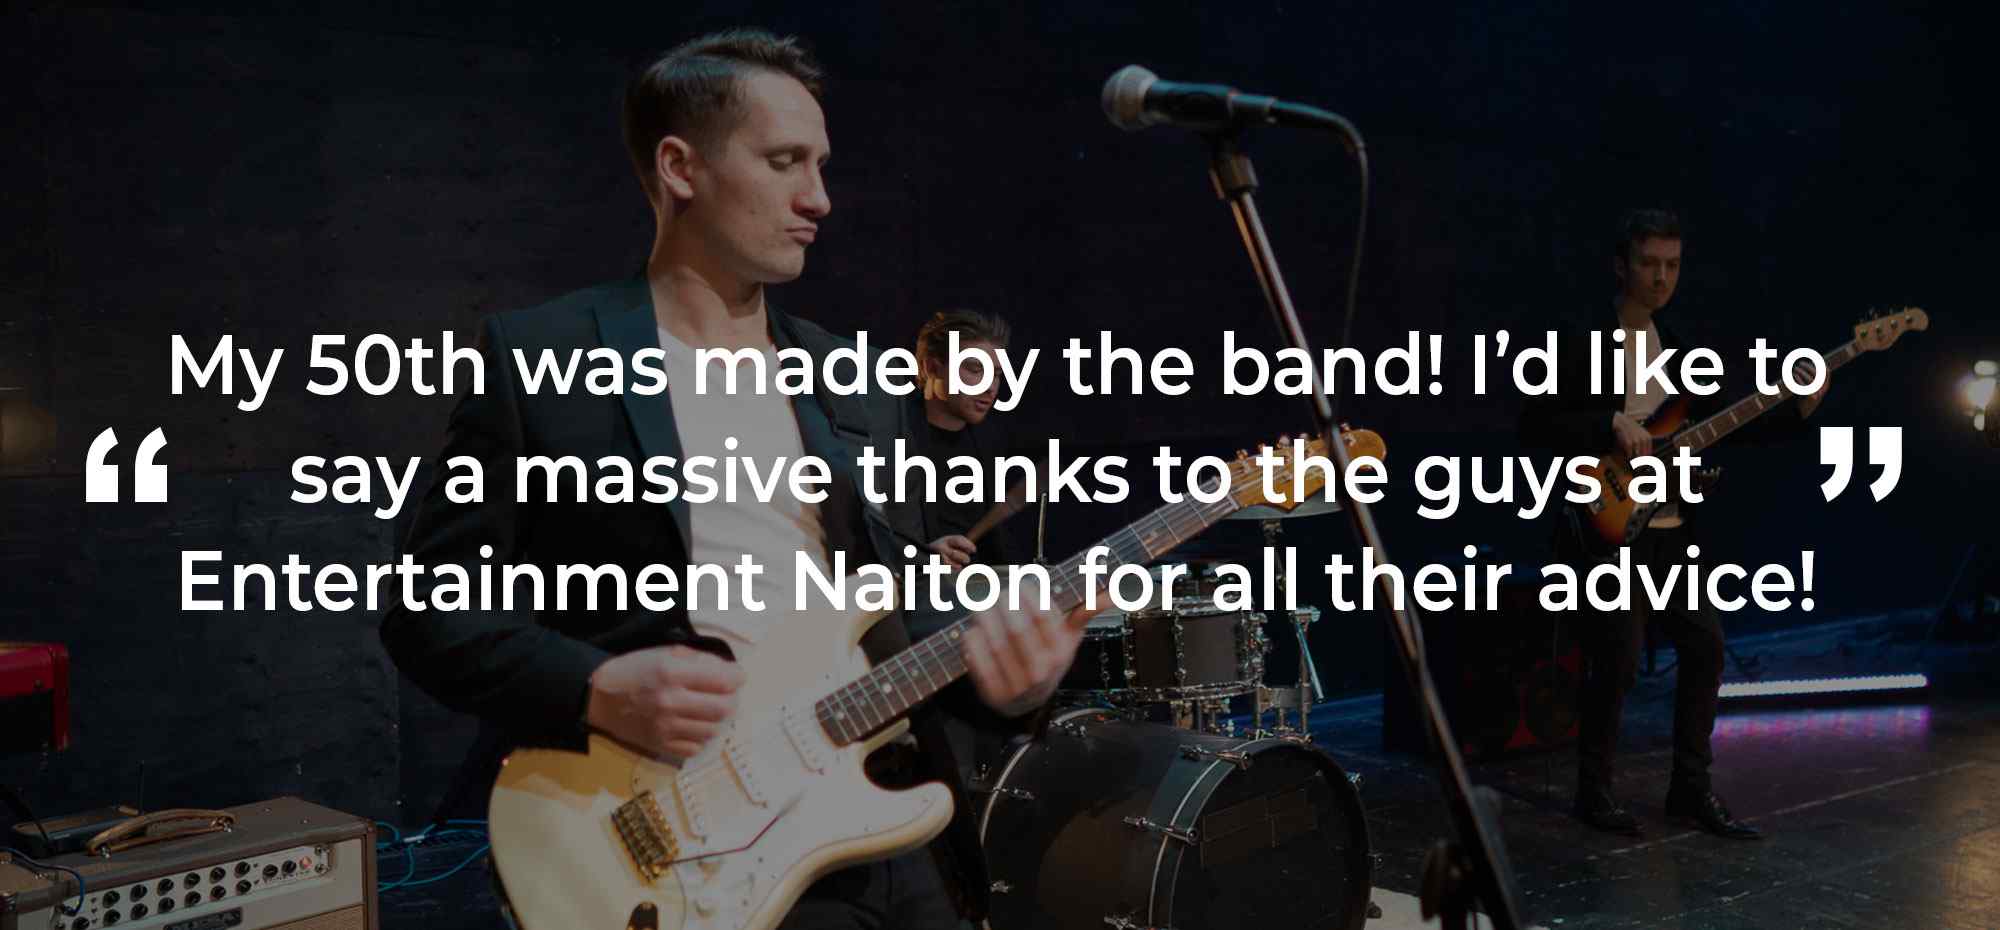 Client Review of a Party Band East Sussex